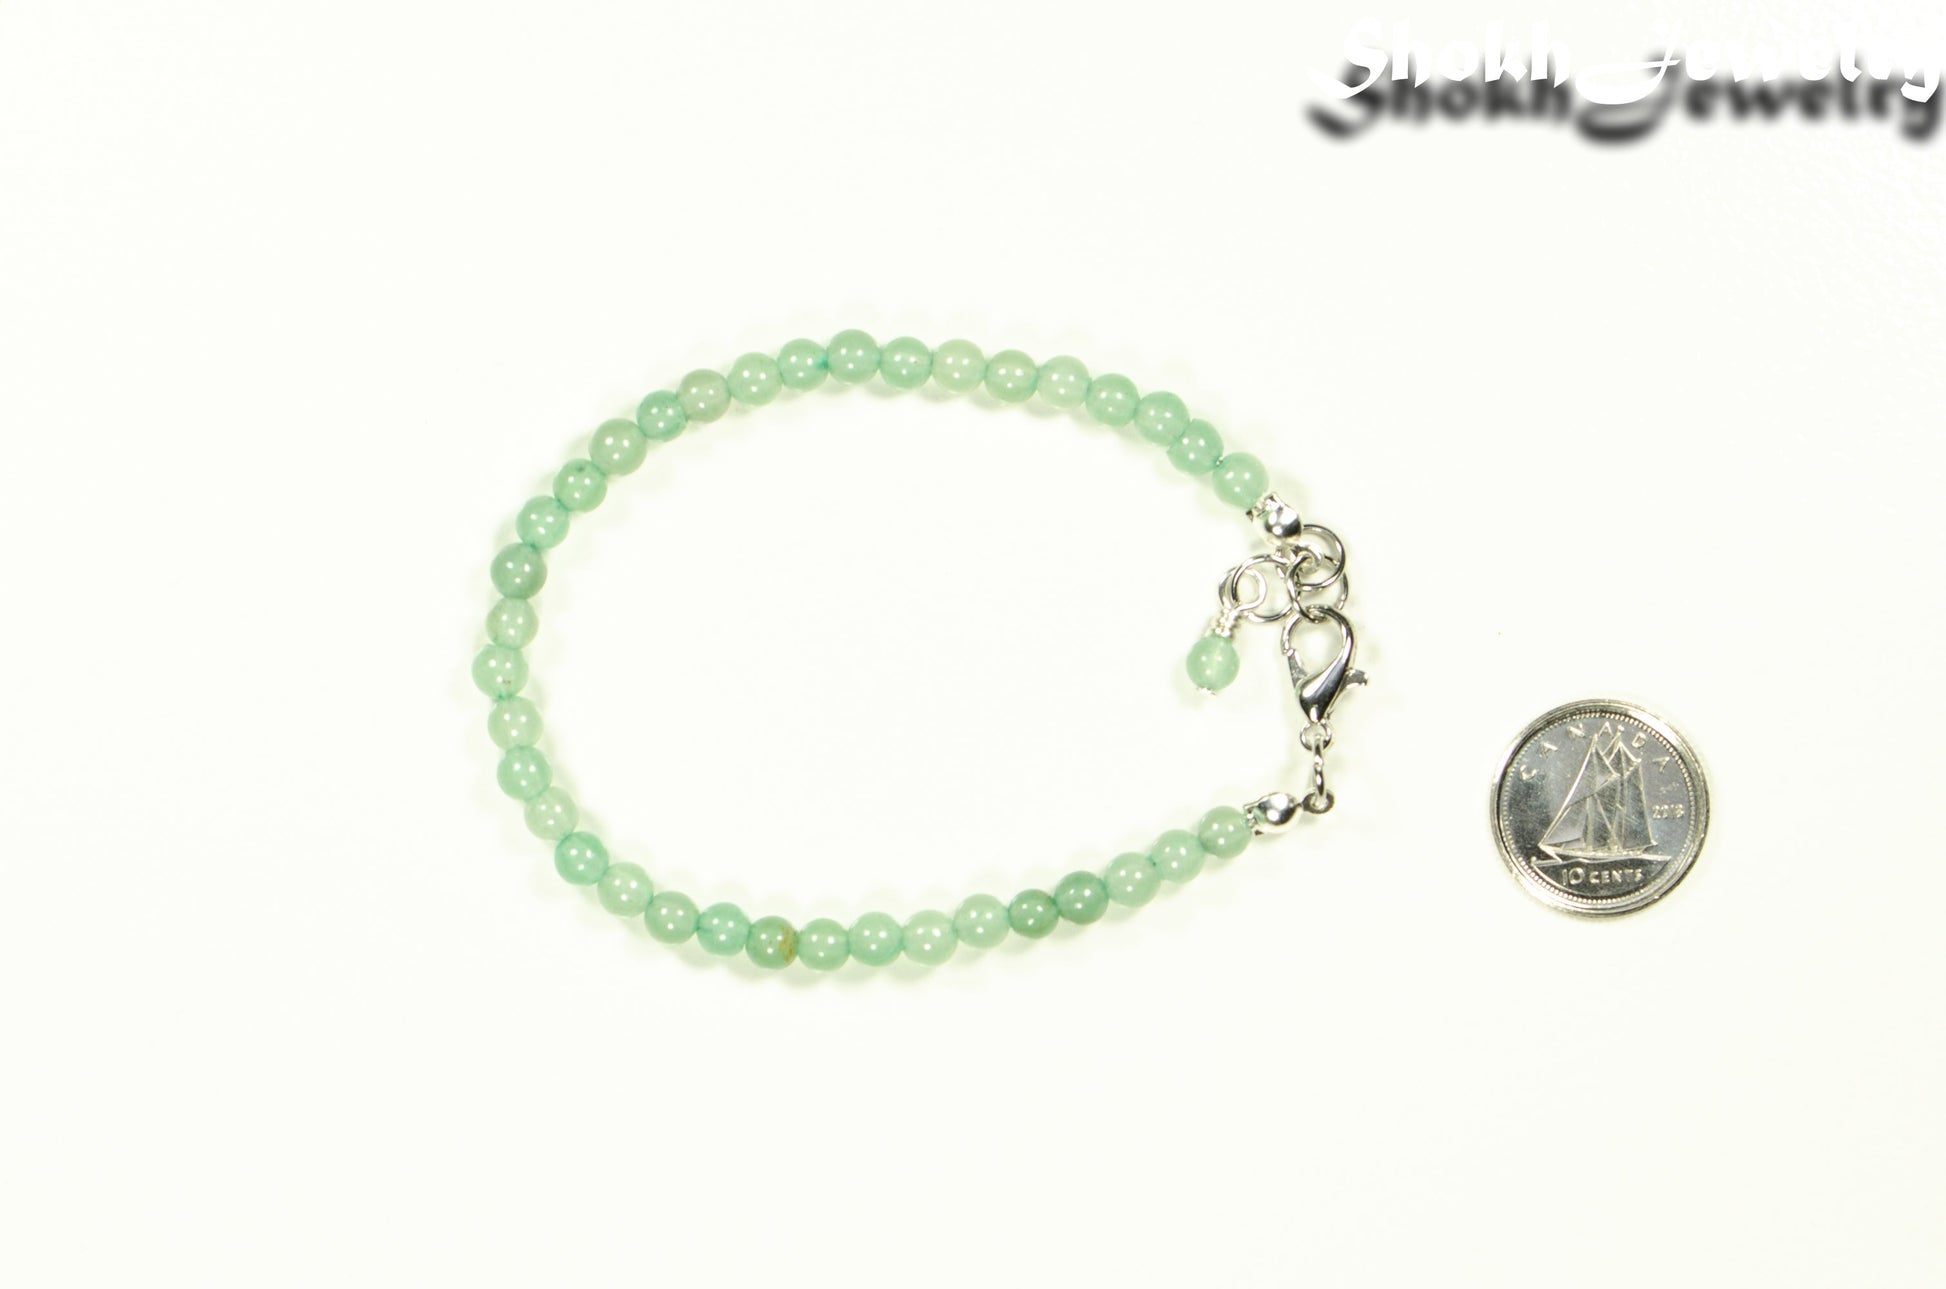 4mm Green Aventurine anklet with Clasp beside a dime.